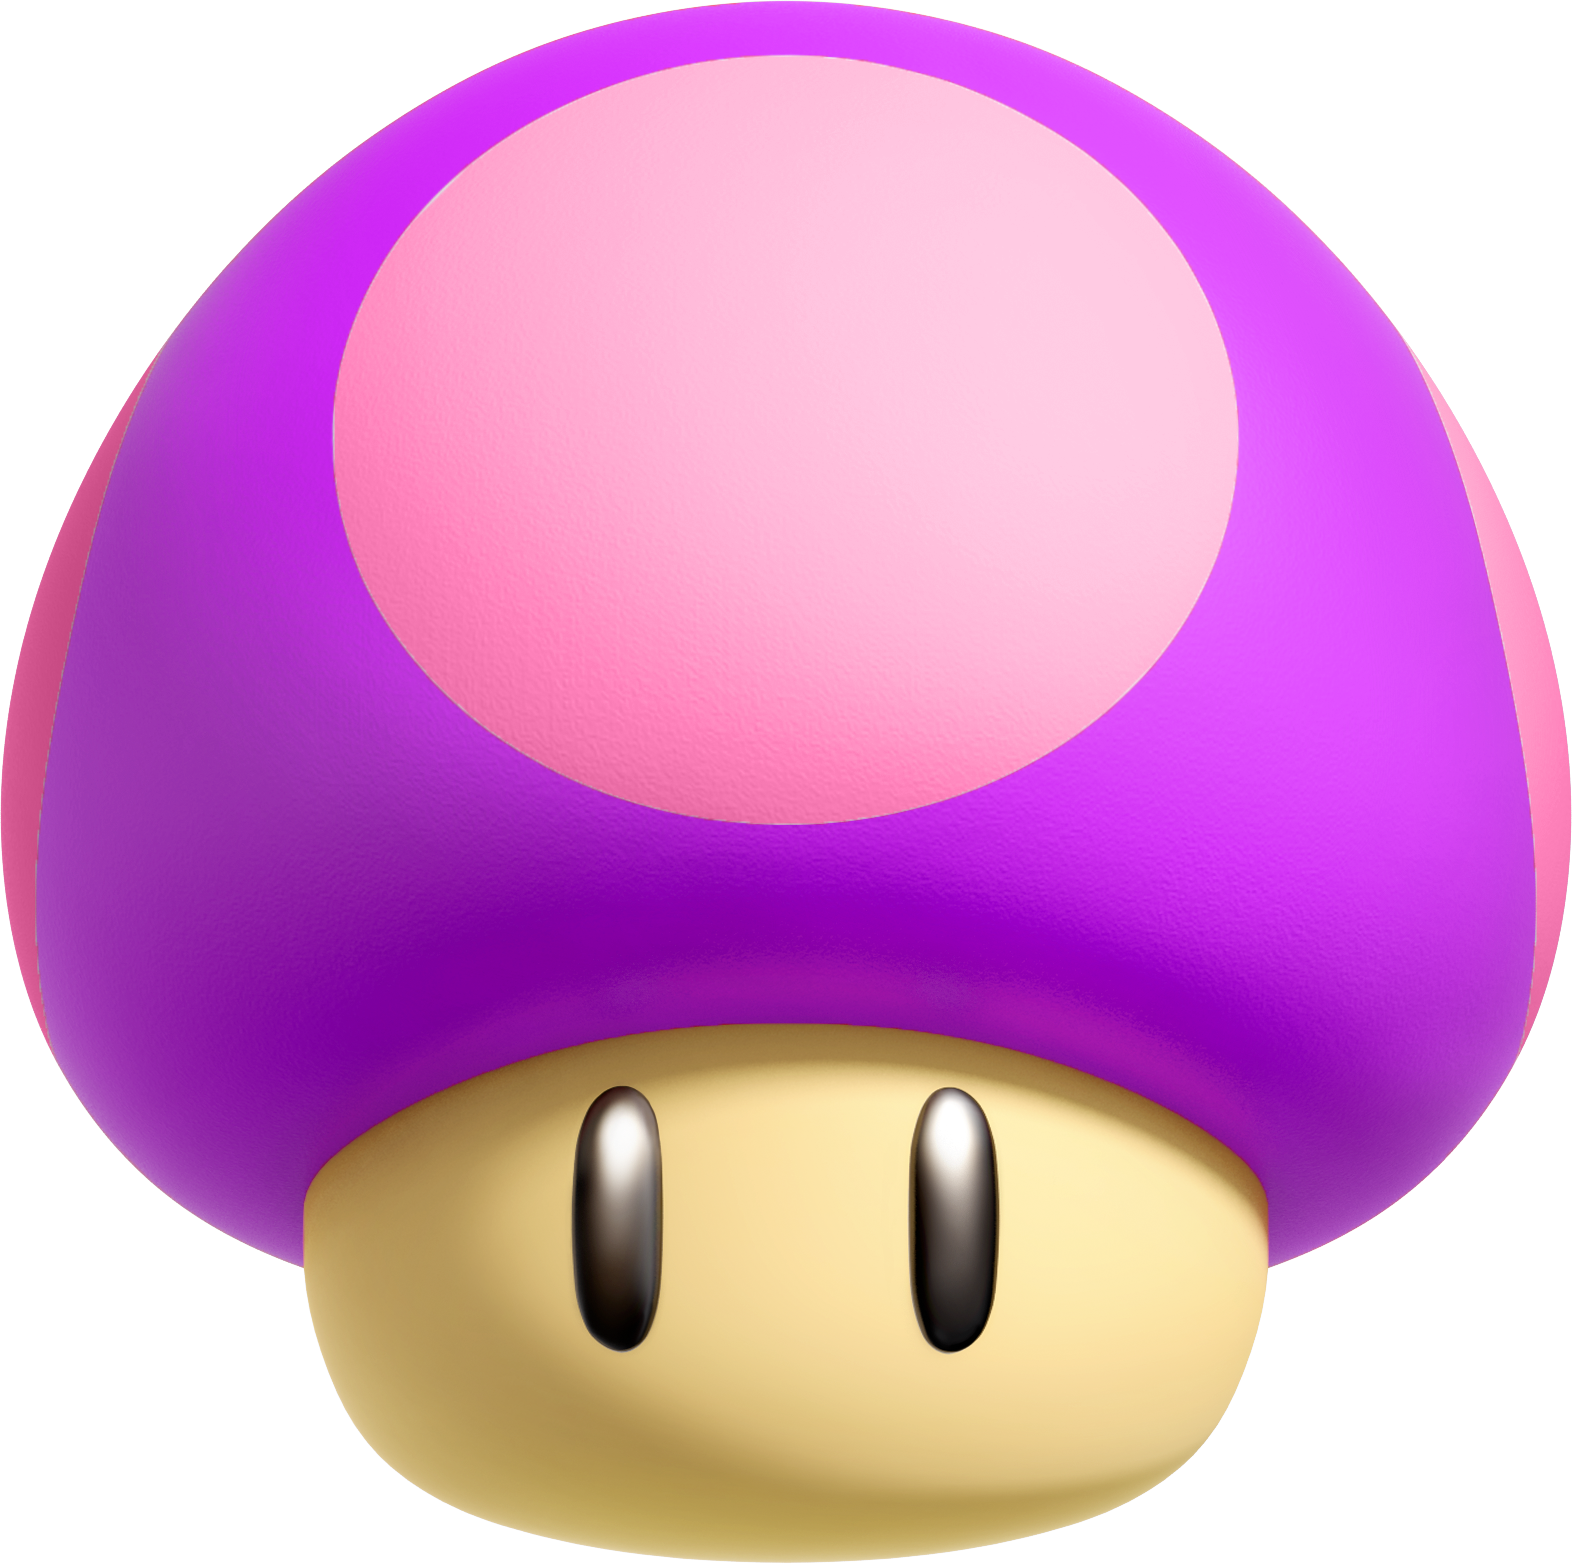 A Cartoon Mushroom With A Pink And White Circle